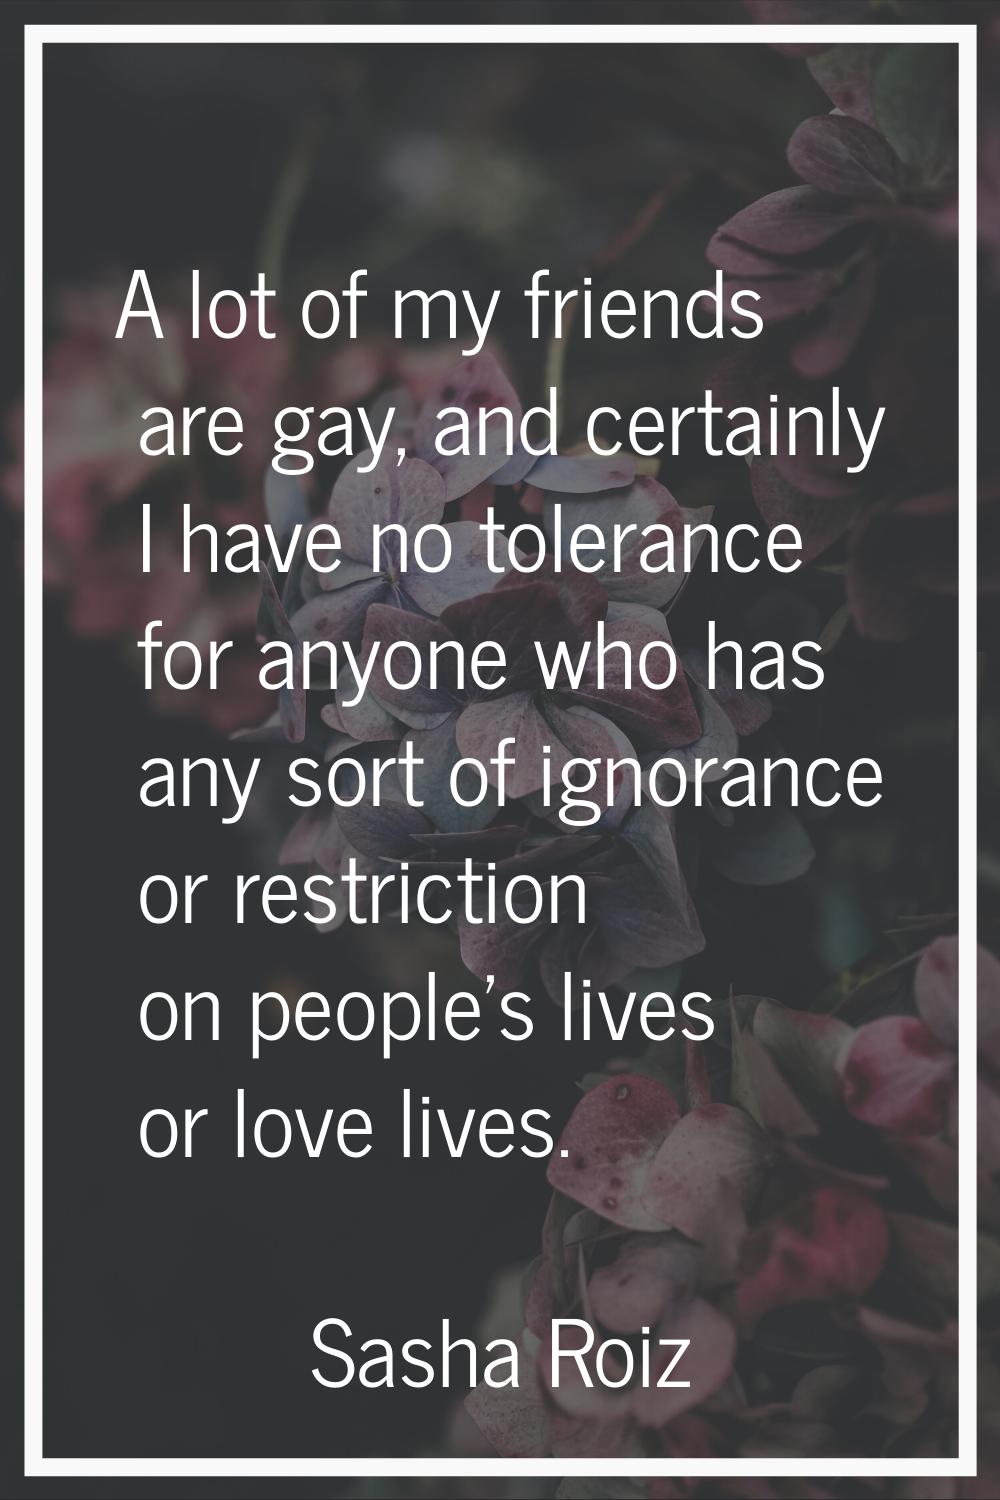 A lot of my friends are gay, and certainly I have no tolerance for anyone who has any sort of ignor